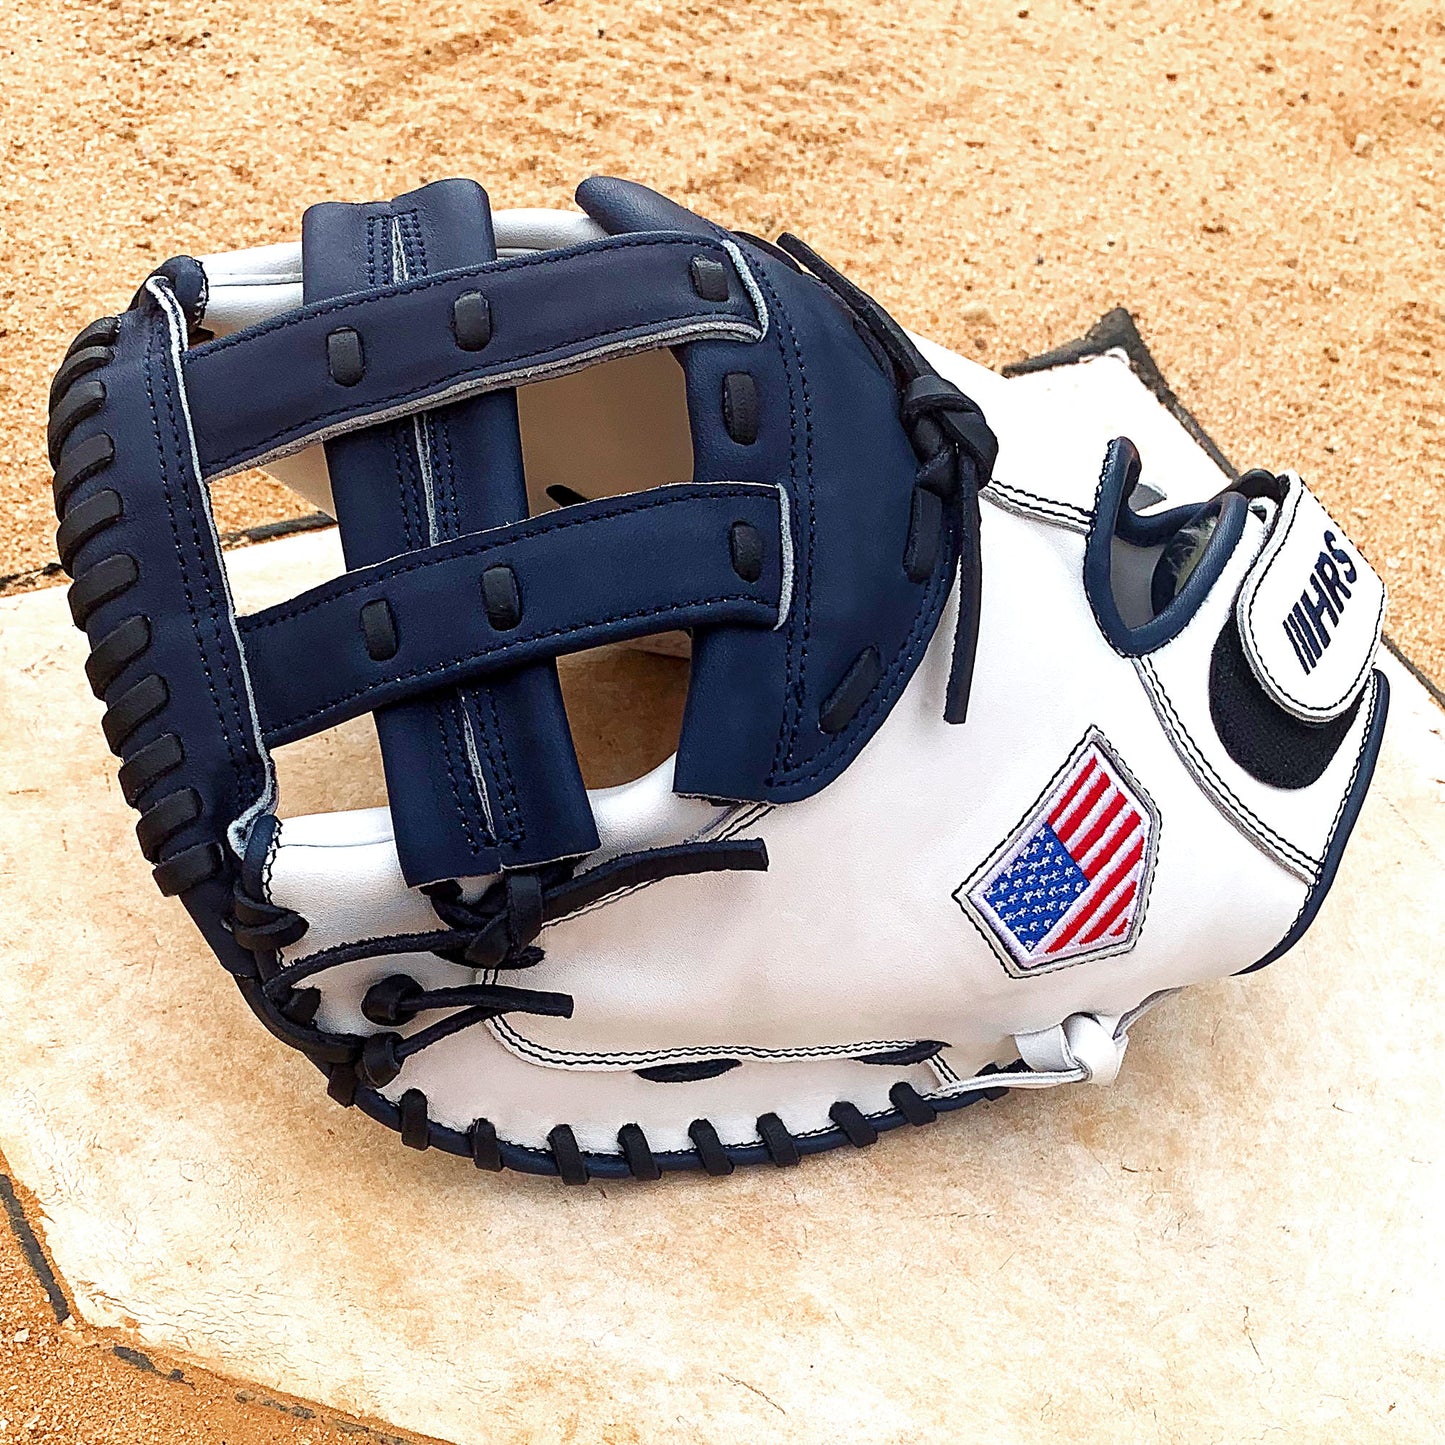 34" Softball Catcher's Mitt - White with Navy Laces